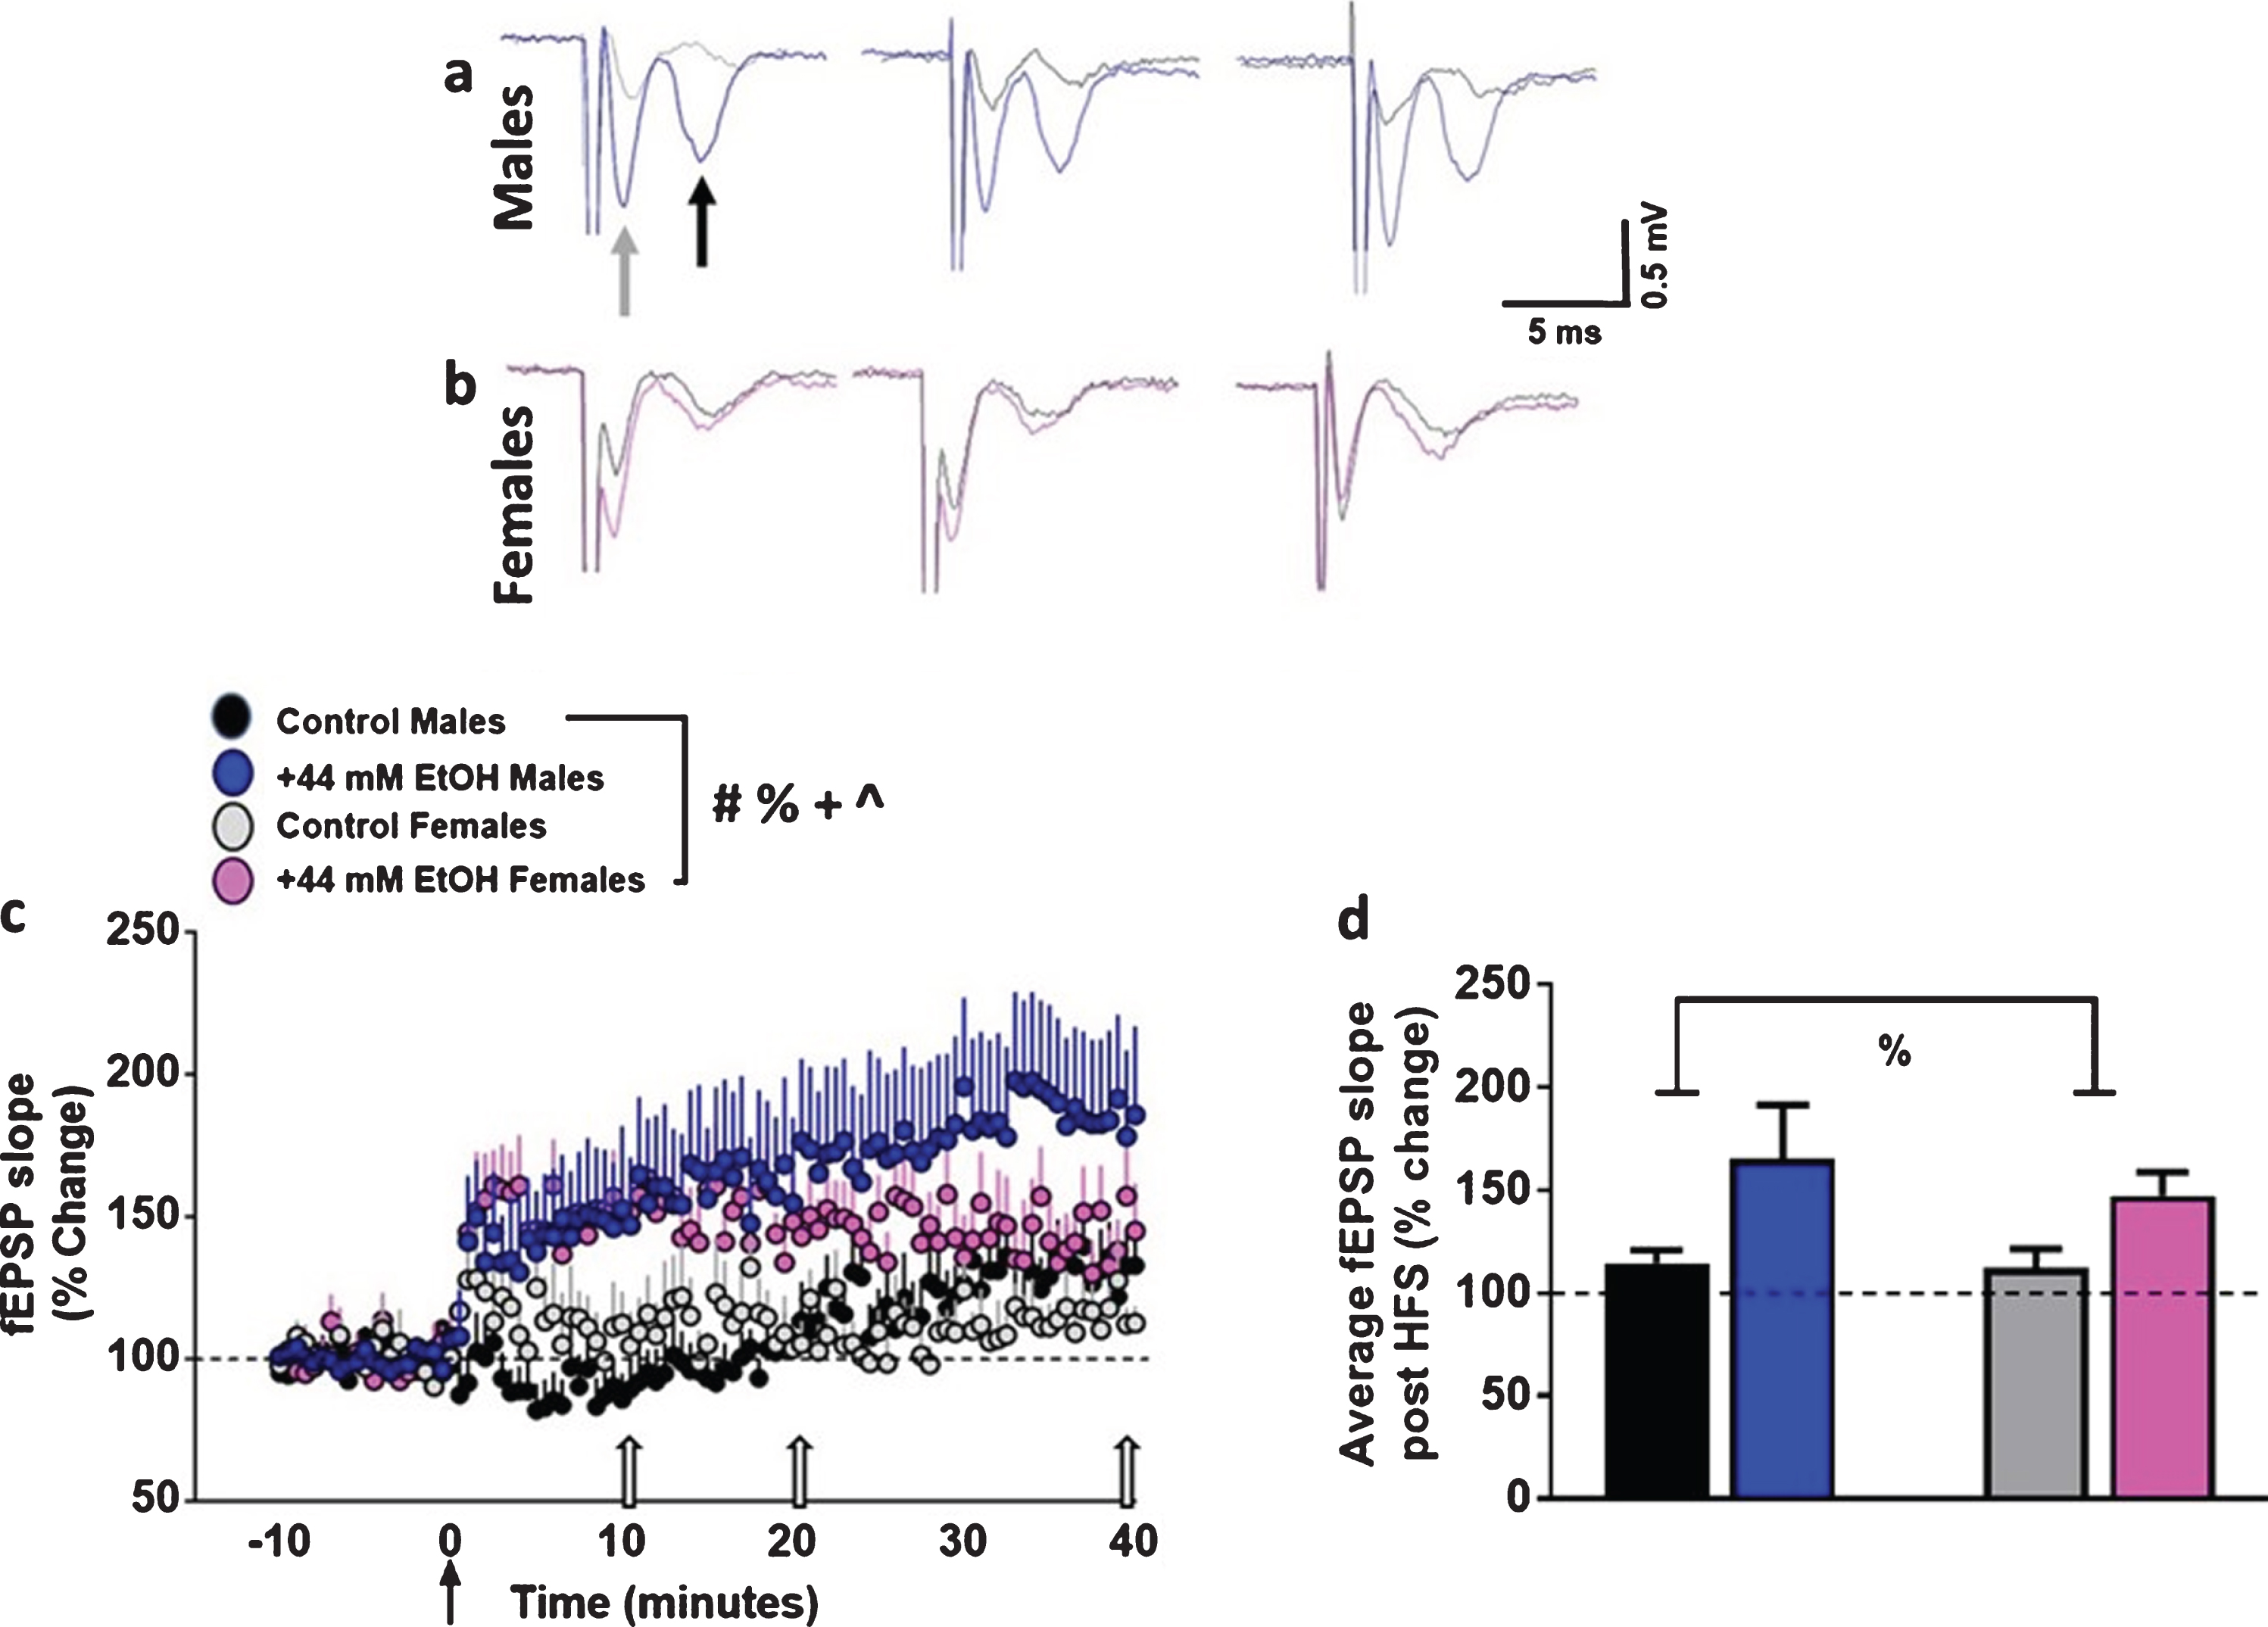 Ex vivo ethanol exposure facilitates the induction of LTP in dorsomedial striatal synapses in adult male and female rats. (a-b) Representative fEPSP waveforms from males (a) and females (b) from various time points post HFS from the same recordings. Gray arrow in the first trace from males points to fiber volley and black arrow points to fEPSPs. Traces were obtained after HFS at 10, 20 and 40 minutes (indicated as open arrows in (c)) timeframe from all groups. Control males, black; EtOH males, blue; control females, gray; EtOH females, pink. Note that the slope of the fEPSPs (the second downward waveform) increases after HFS in EtOH-treated slices versus vehicle control condition in male and female rats. (c) x-y graph of time course of fEPSPs before and after HFS in all groups. Arrow in (c) at zero points to the time of HFS. (d) Average fEPSP slope of each experimental group post HFS (0 to 40 minutes). Data are represented as mean±S.E.M. Number of slices: n = 11 control male, n = 13 EtOH male, n = 8 control female, n = 8 EtOH female. #p < 0.05 significant interaction, %p < 0.05 main effect of EtOH, +p < 0.05 main effect of sex, ∧p < 0.05 main effect of time by three-way or two-way ANOVA.